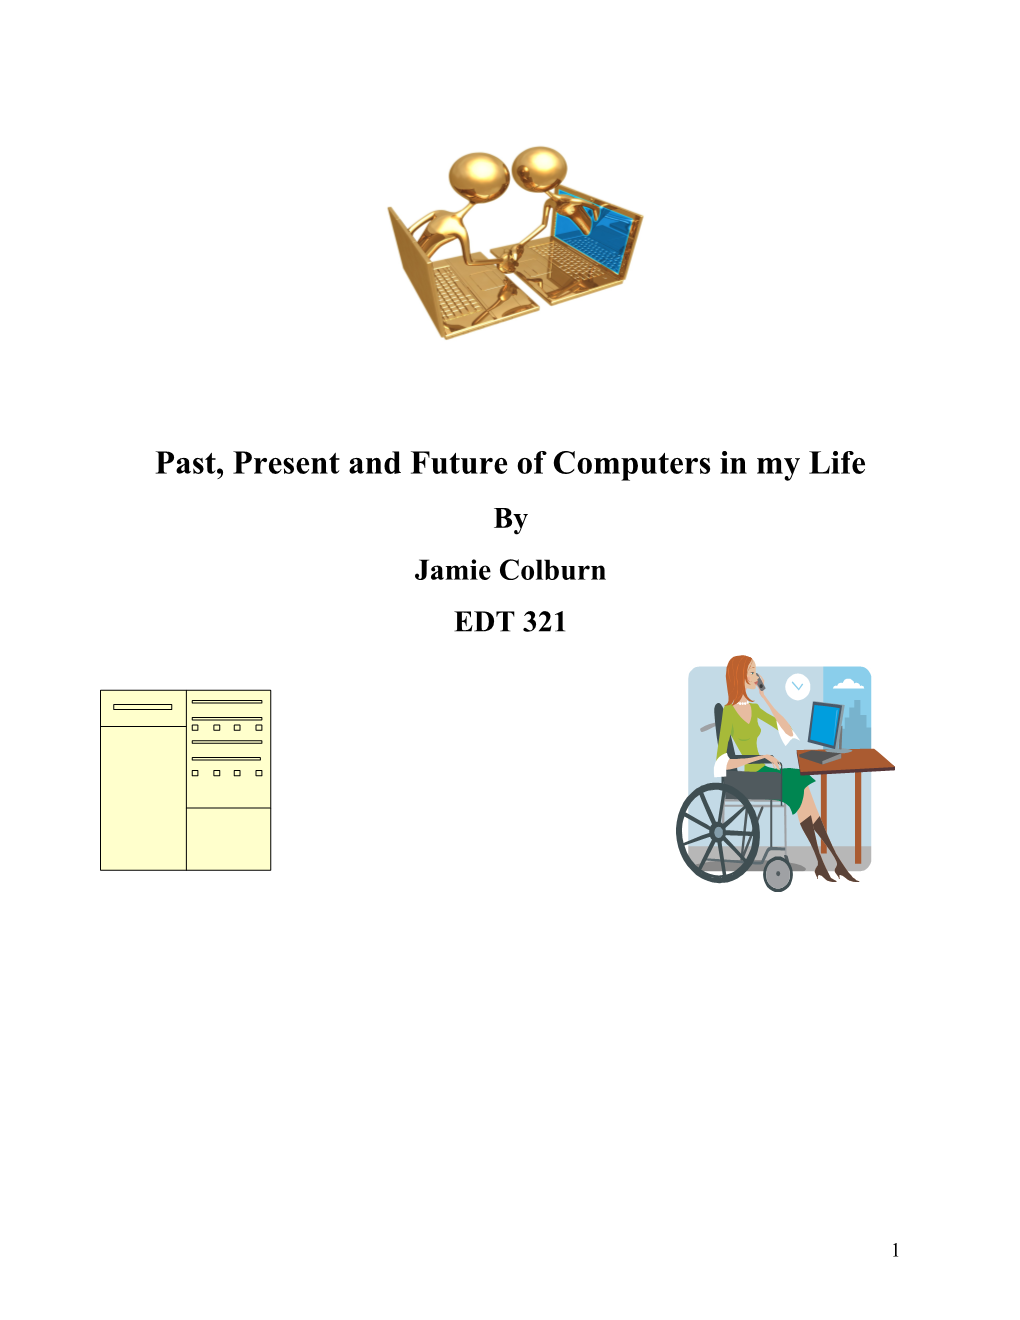 Past, Present and Future of Computers in My Life